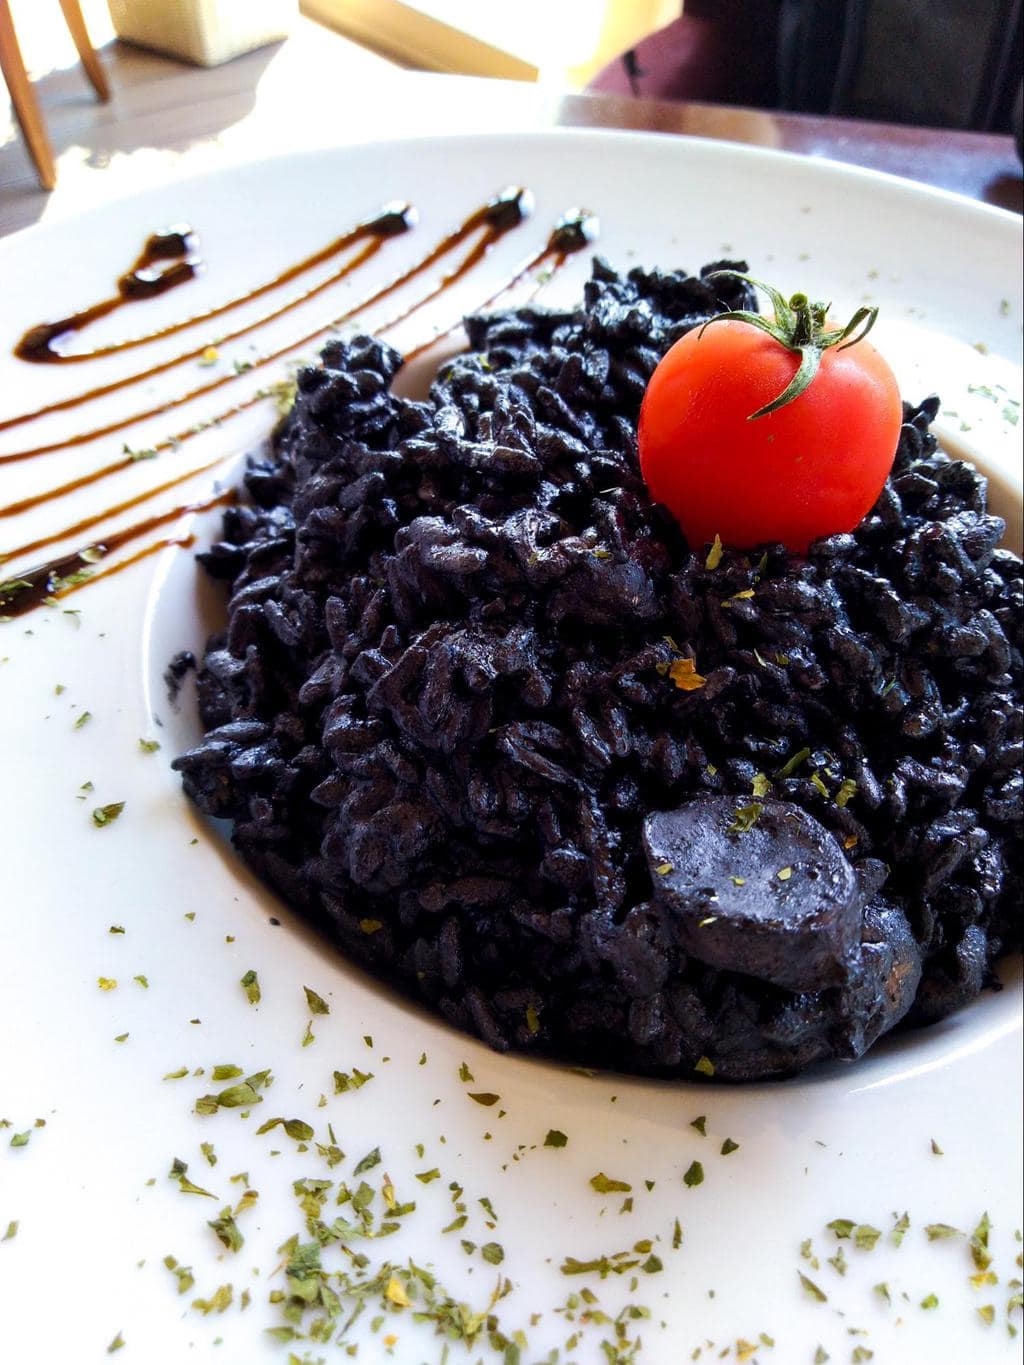 Another version of Montenegrin black risotto